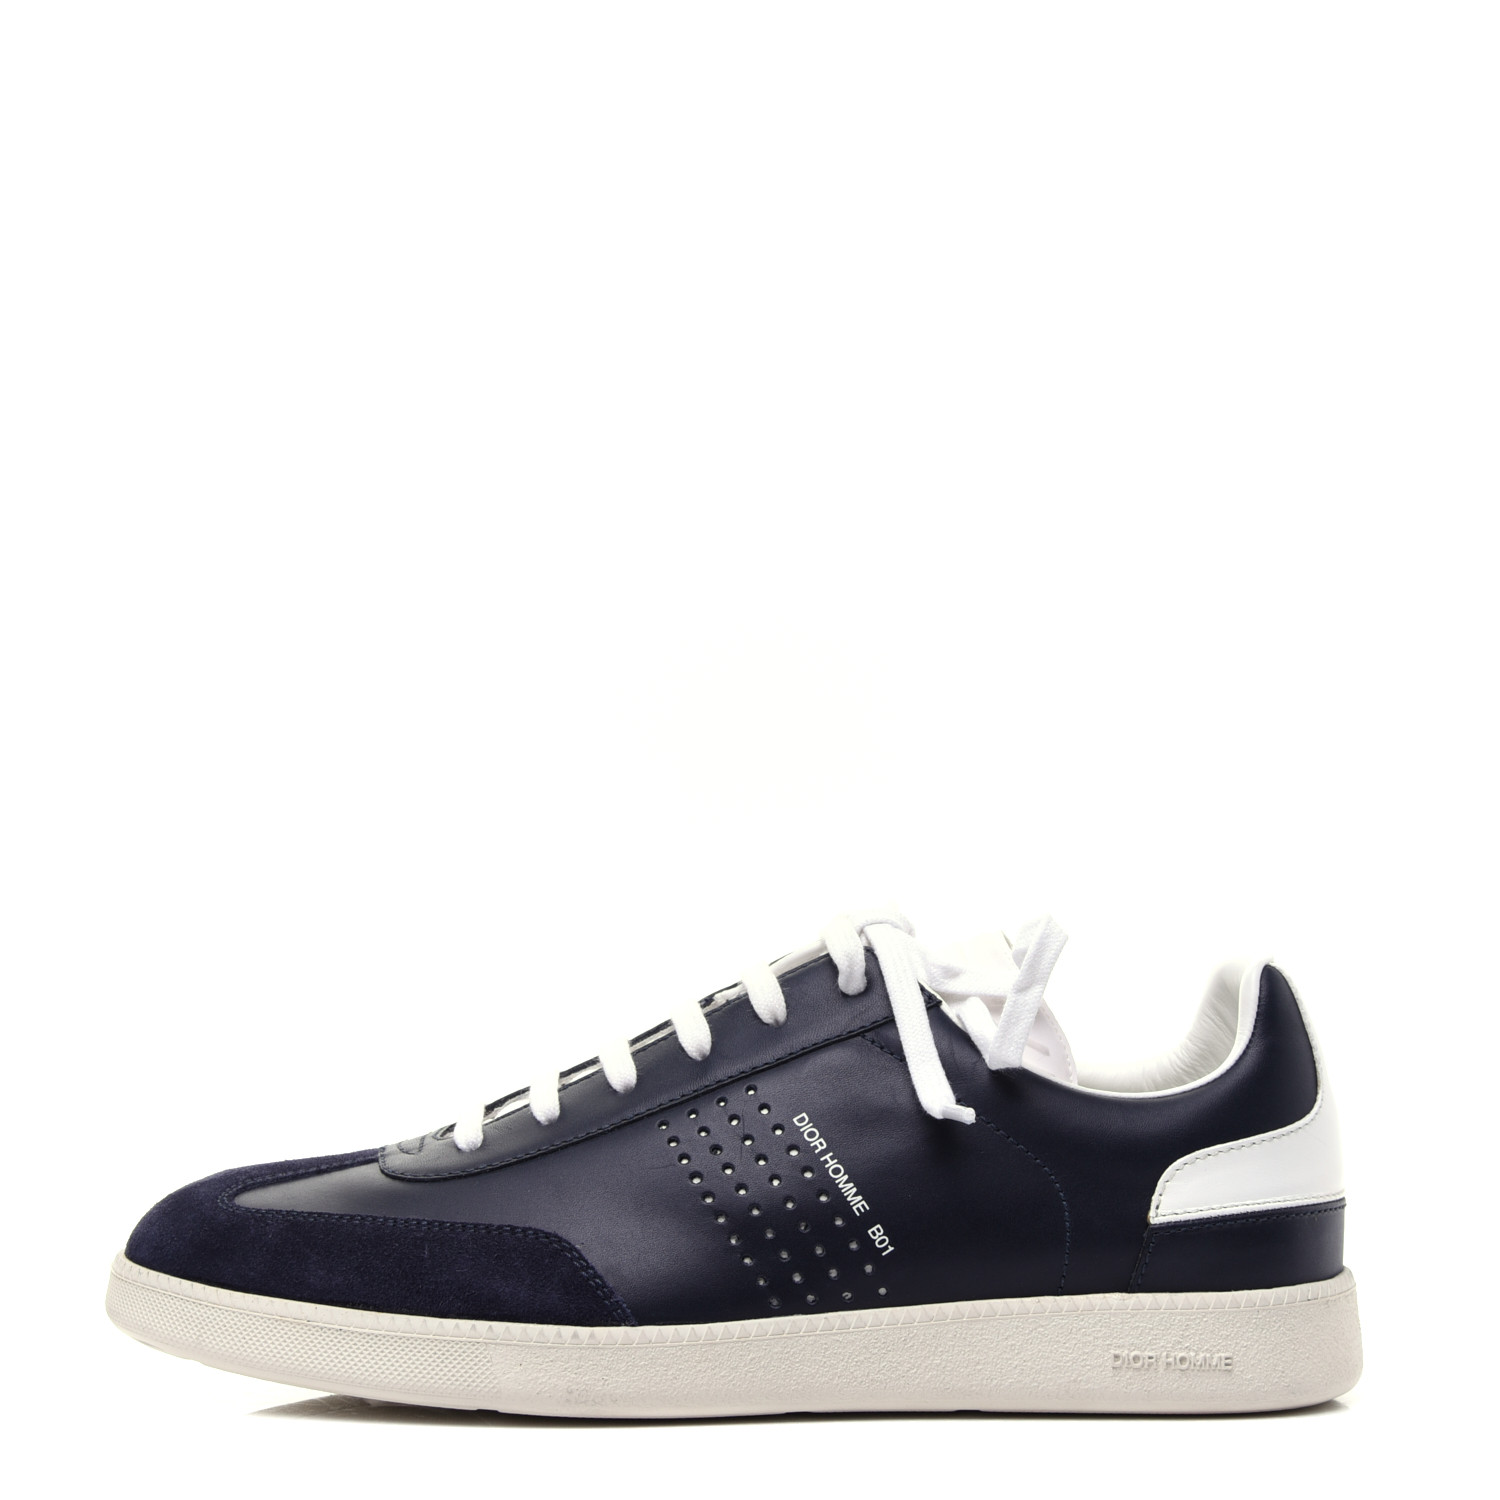 CHRISTIAN DIOR Homme Smooth Calfskin Suede Mens B01 Sneakers 39 Blue ...